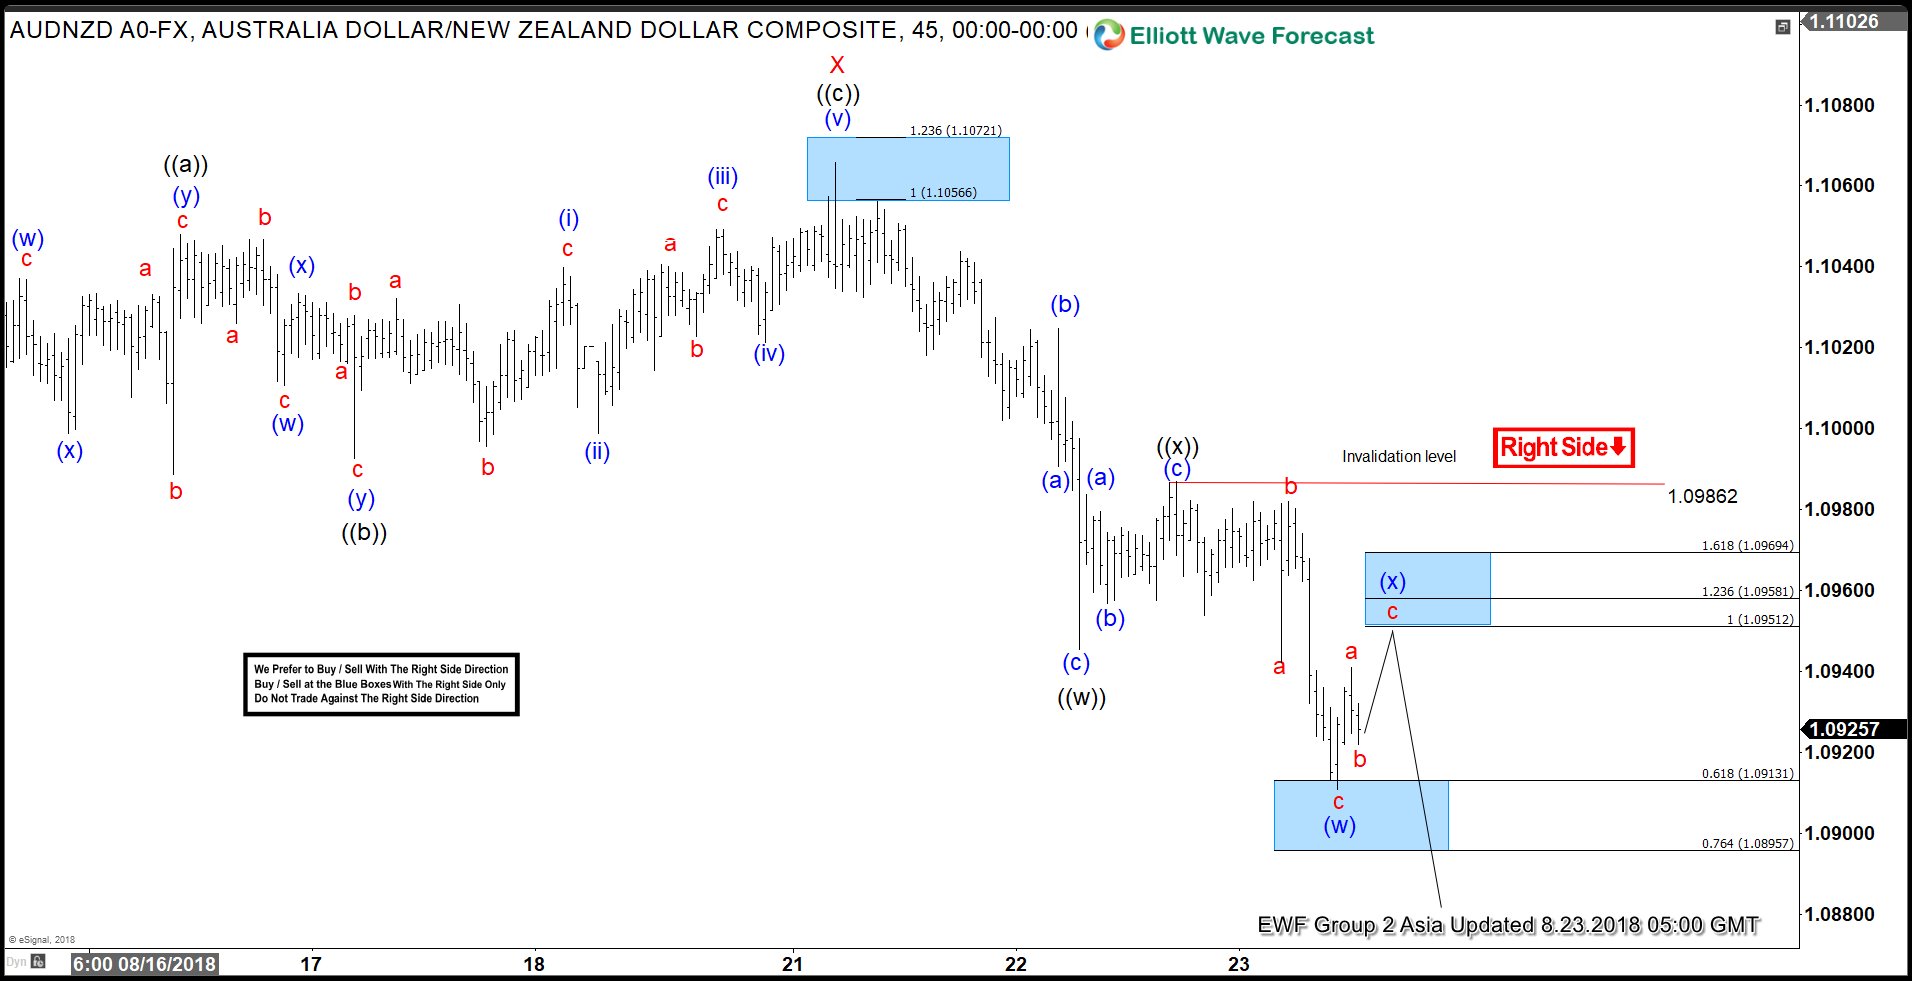 AUDNZD Elliott Wave View: Further Downside Expected